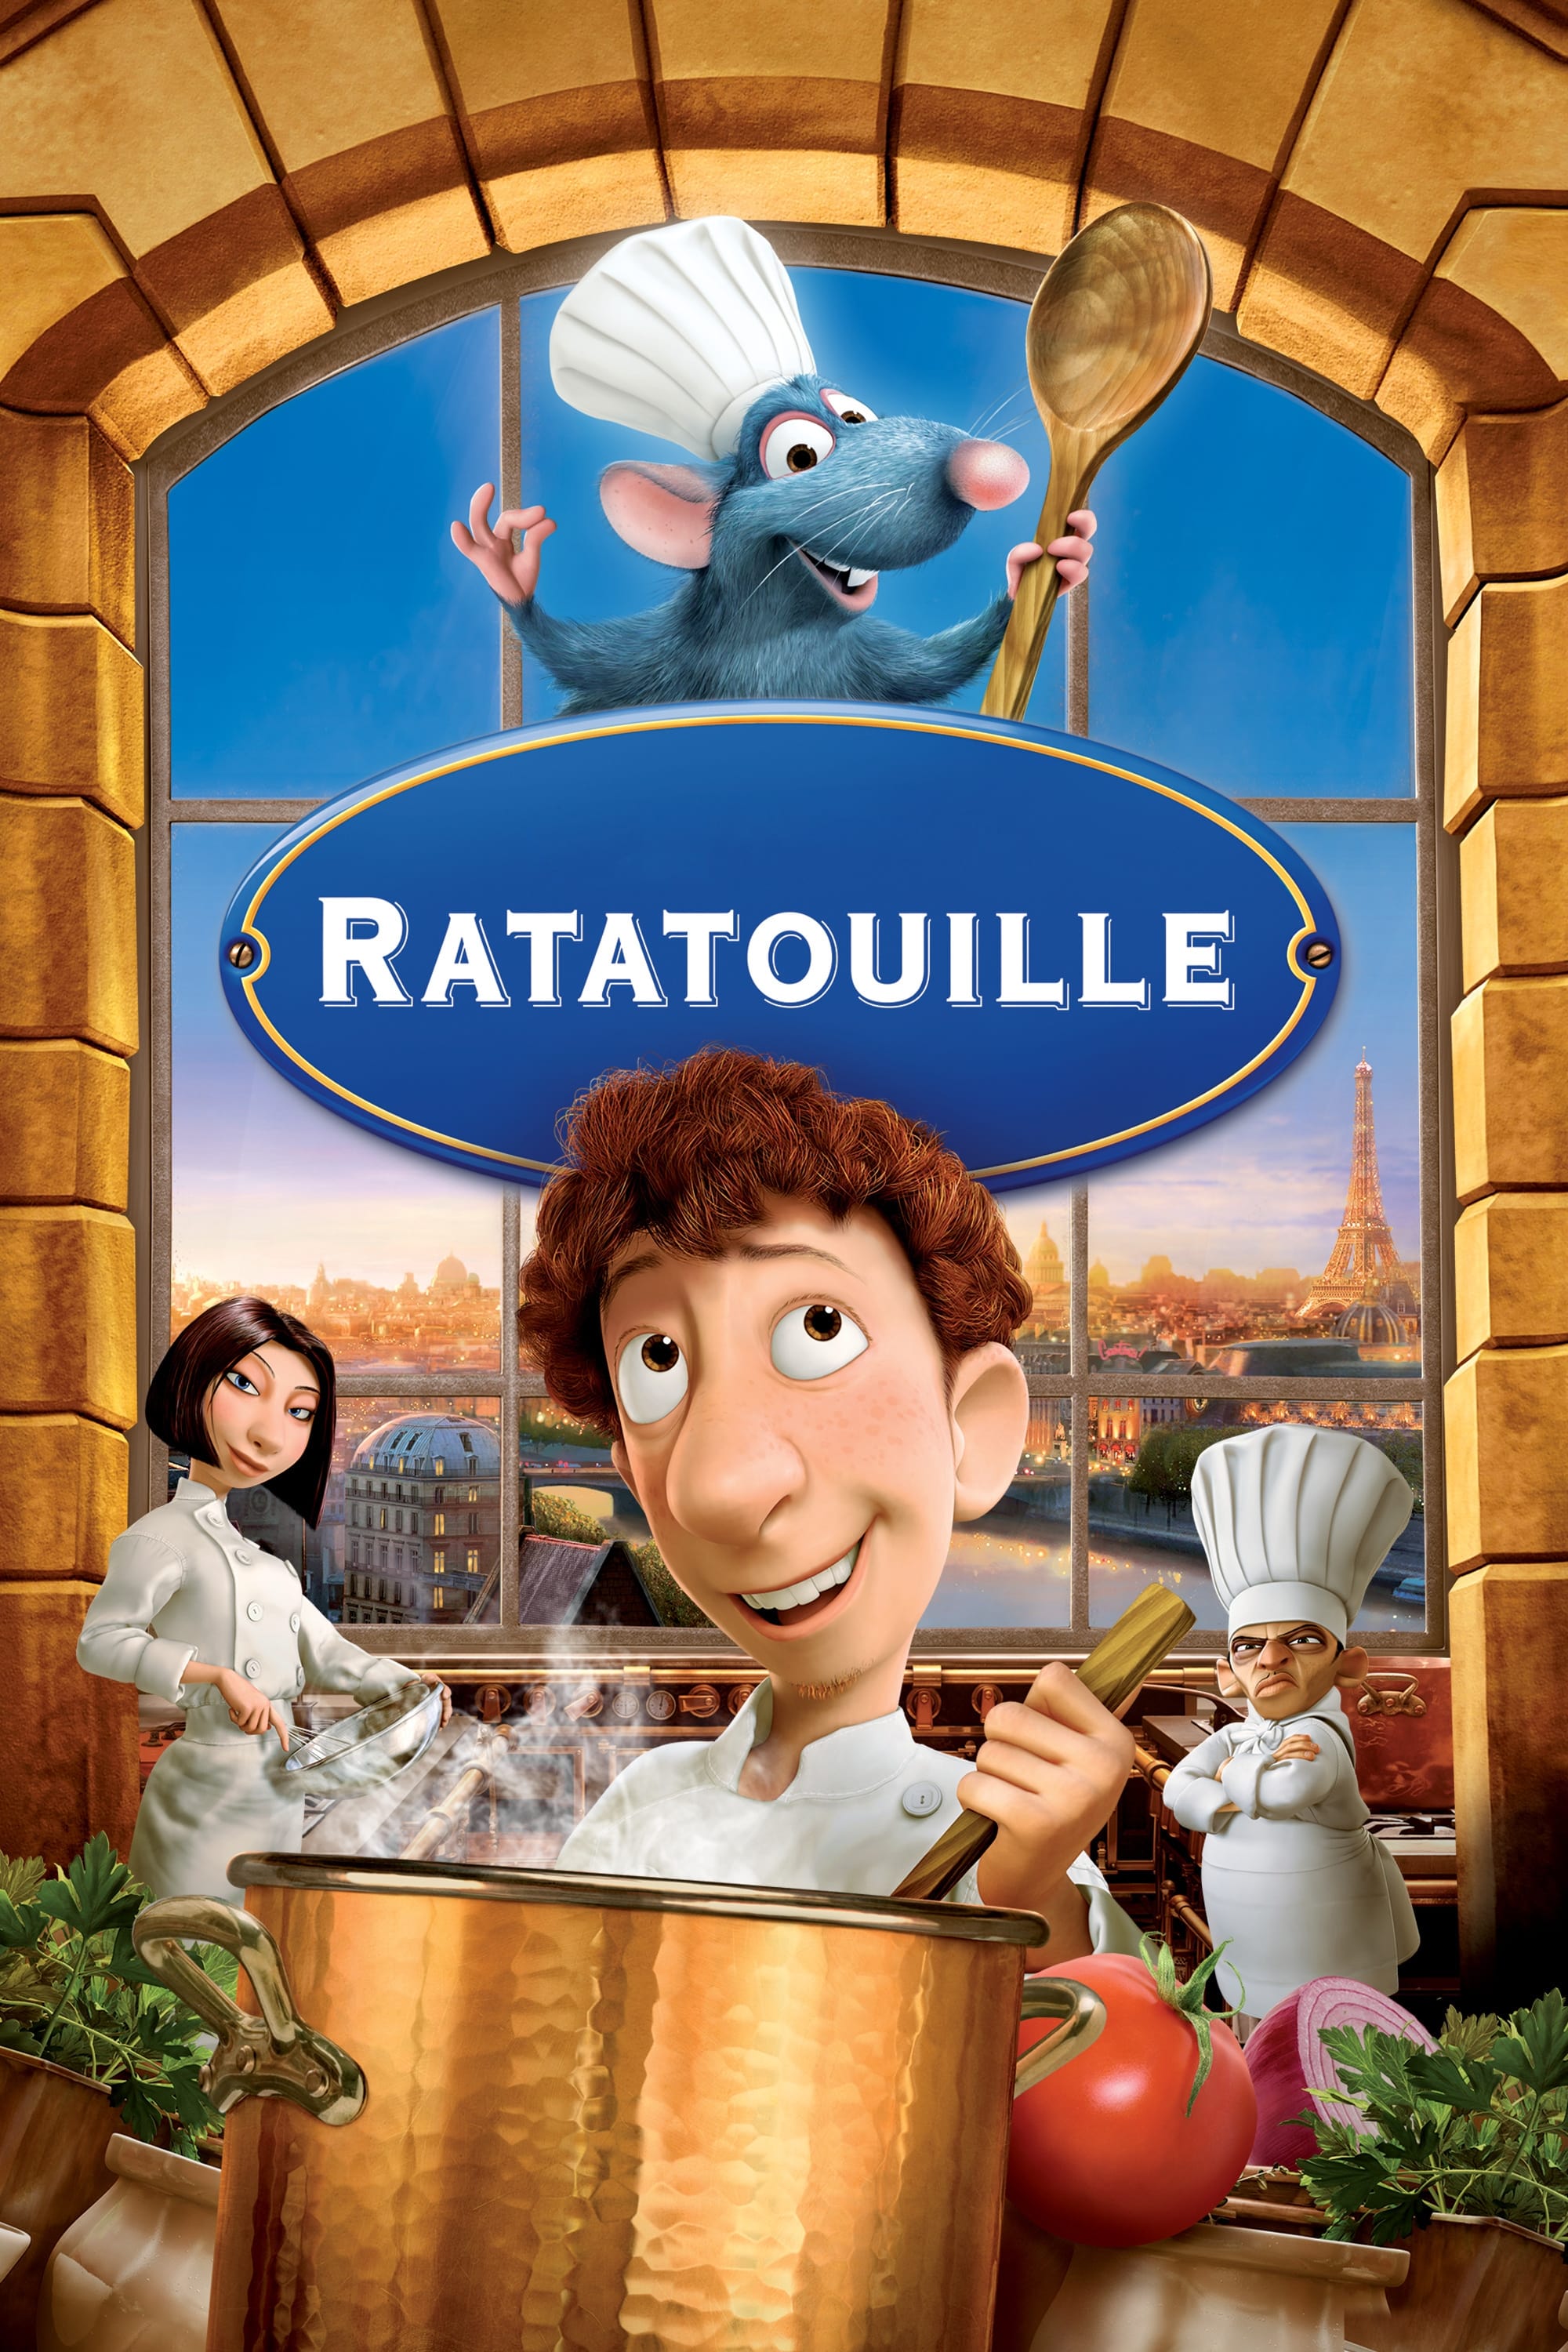 https://static.wikia.nocookie.net/international-entertainment-project/images/4/48/Ratatouille_-_poster_%28English%29.jpg/revision/latest?cb=20220324033007